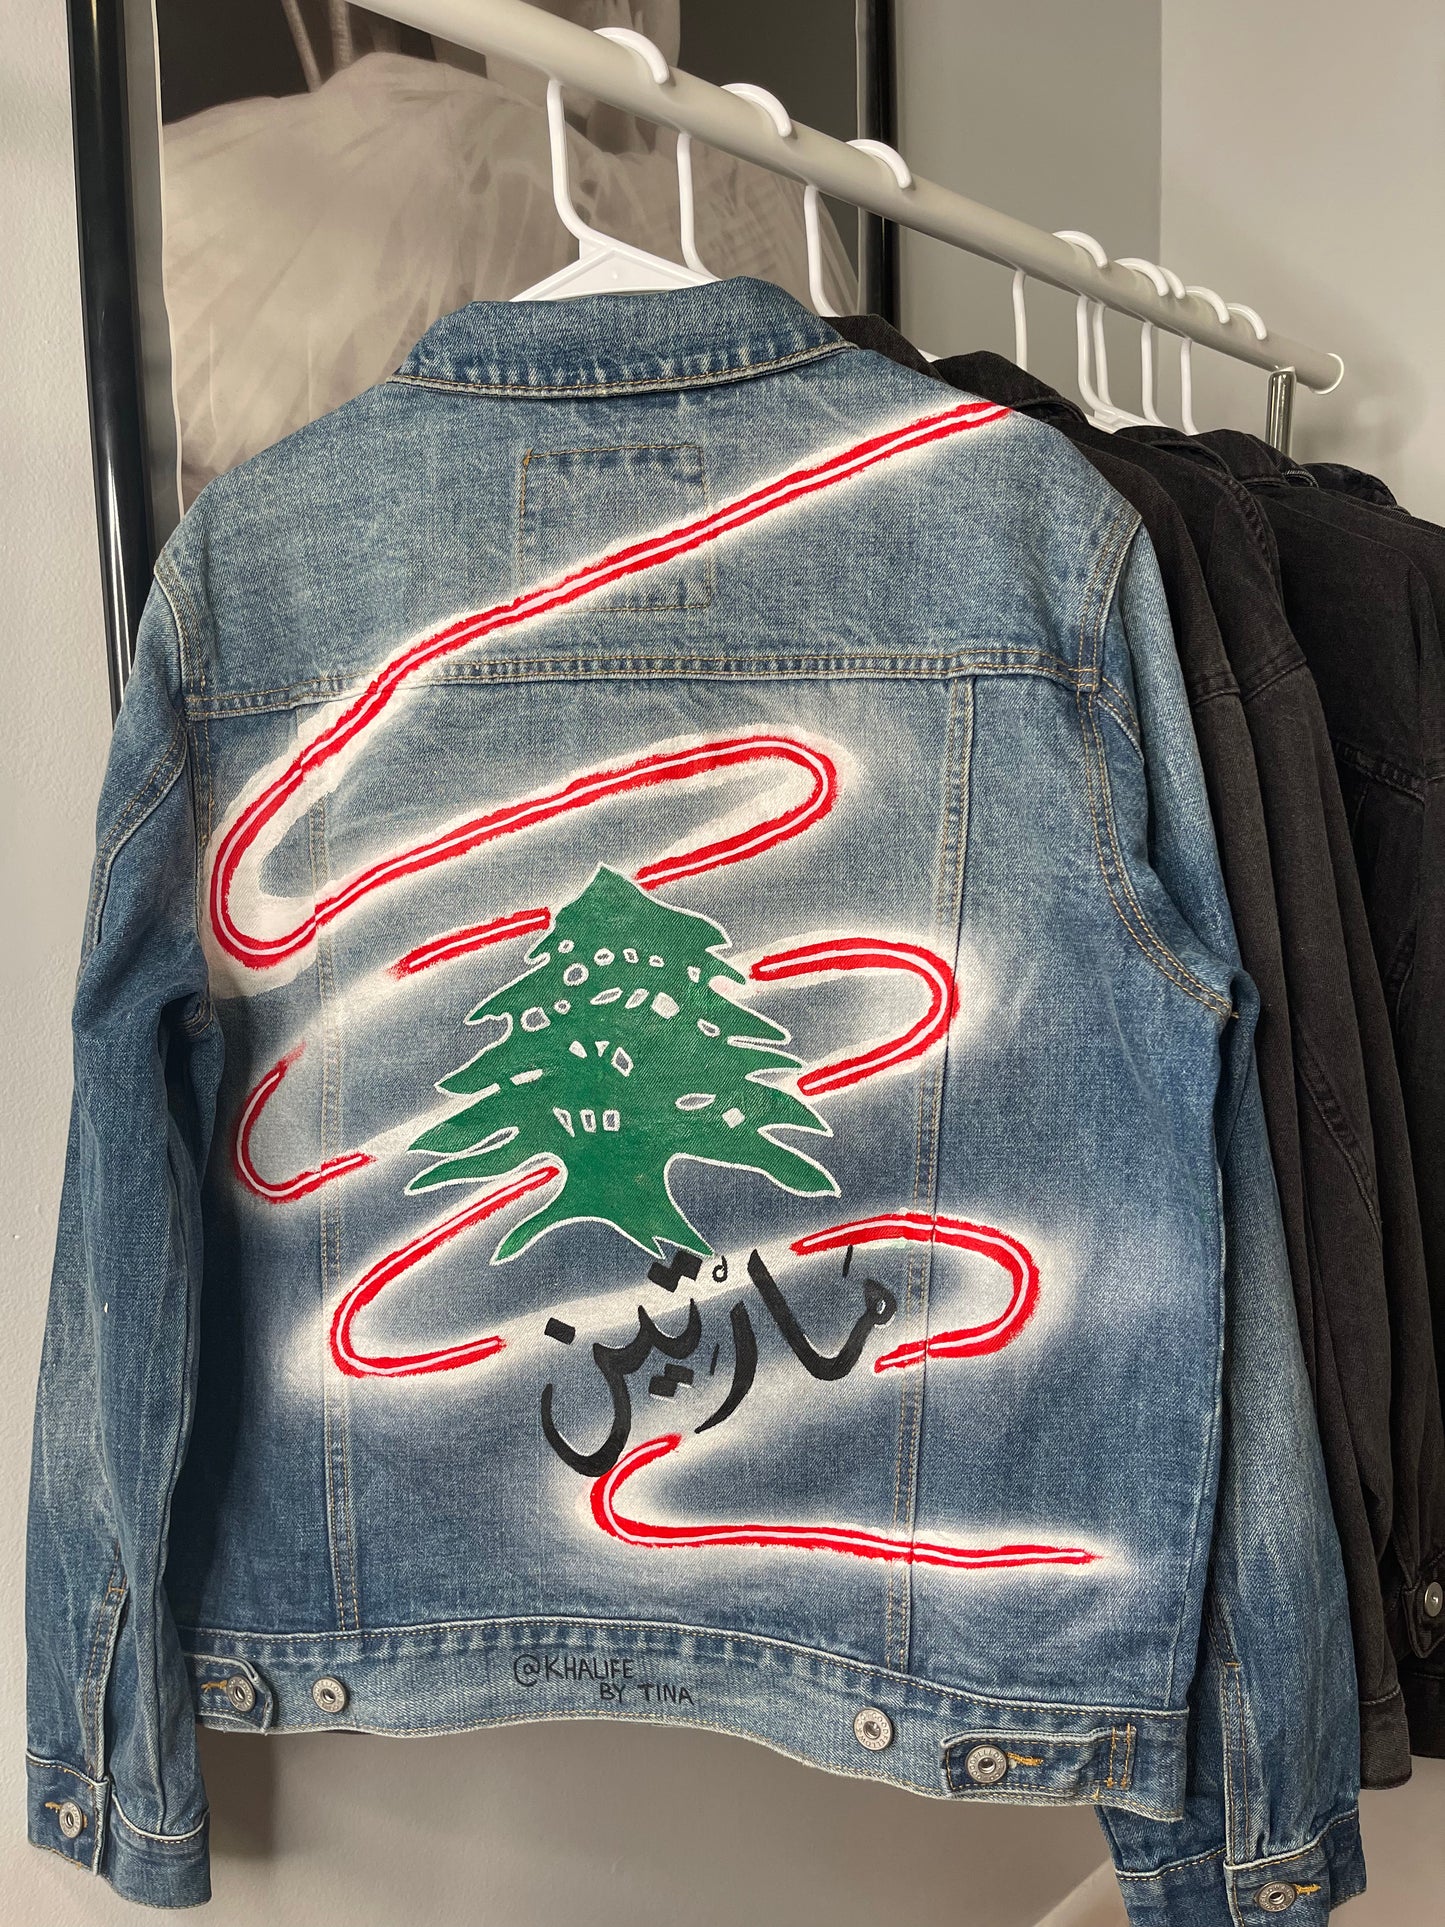 Hand Painted "YOUR NATIONALITY" Denim Jacket